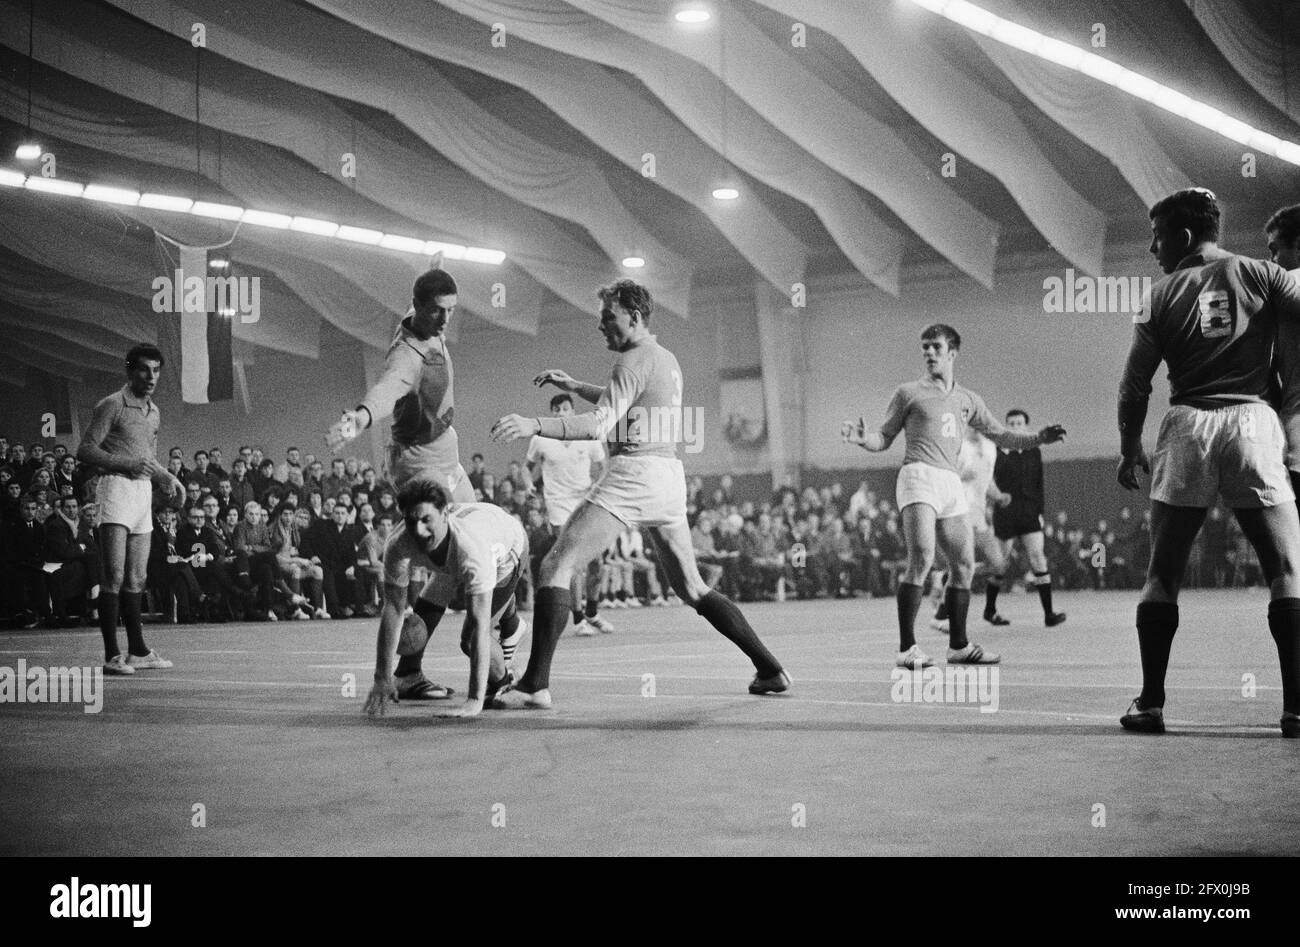 Indoor handball Netherlands against France at The Hague, Fran attack by R. Lambert far left the Dutchman Jaap Bax, 7 February 1965, Indoor handball, The Netherlands, 20th century press agency photo, news to remember, documentary, historic photography 1945-1990, visual stories, human history of the Twentieth Century, capturing moments in time Stock Photo